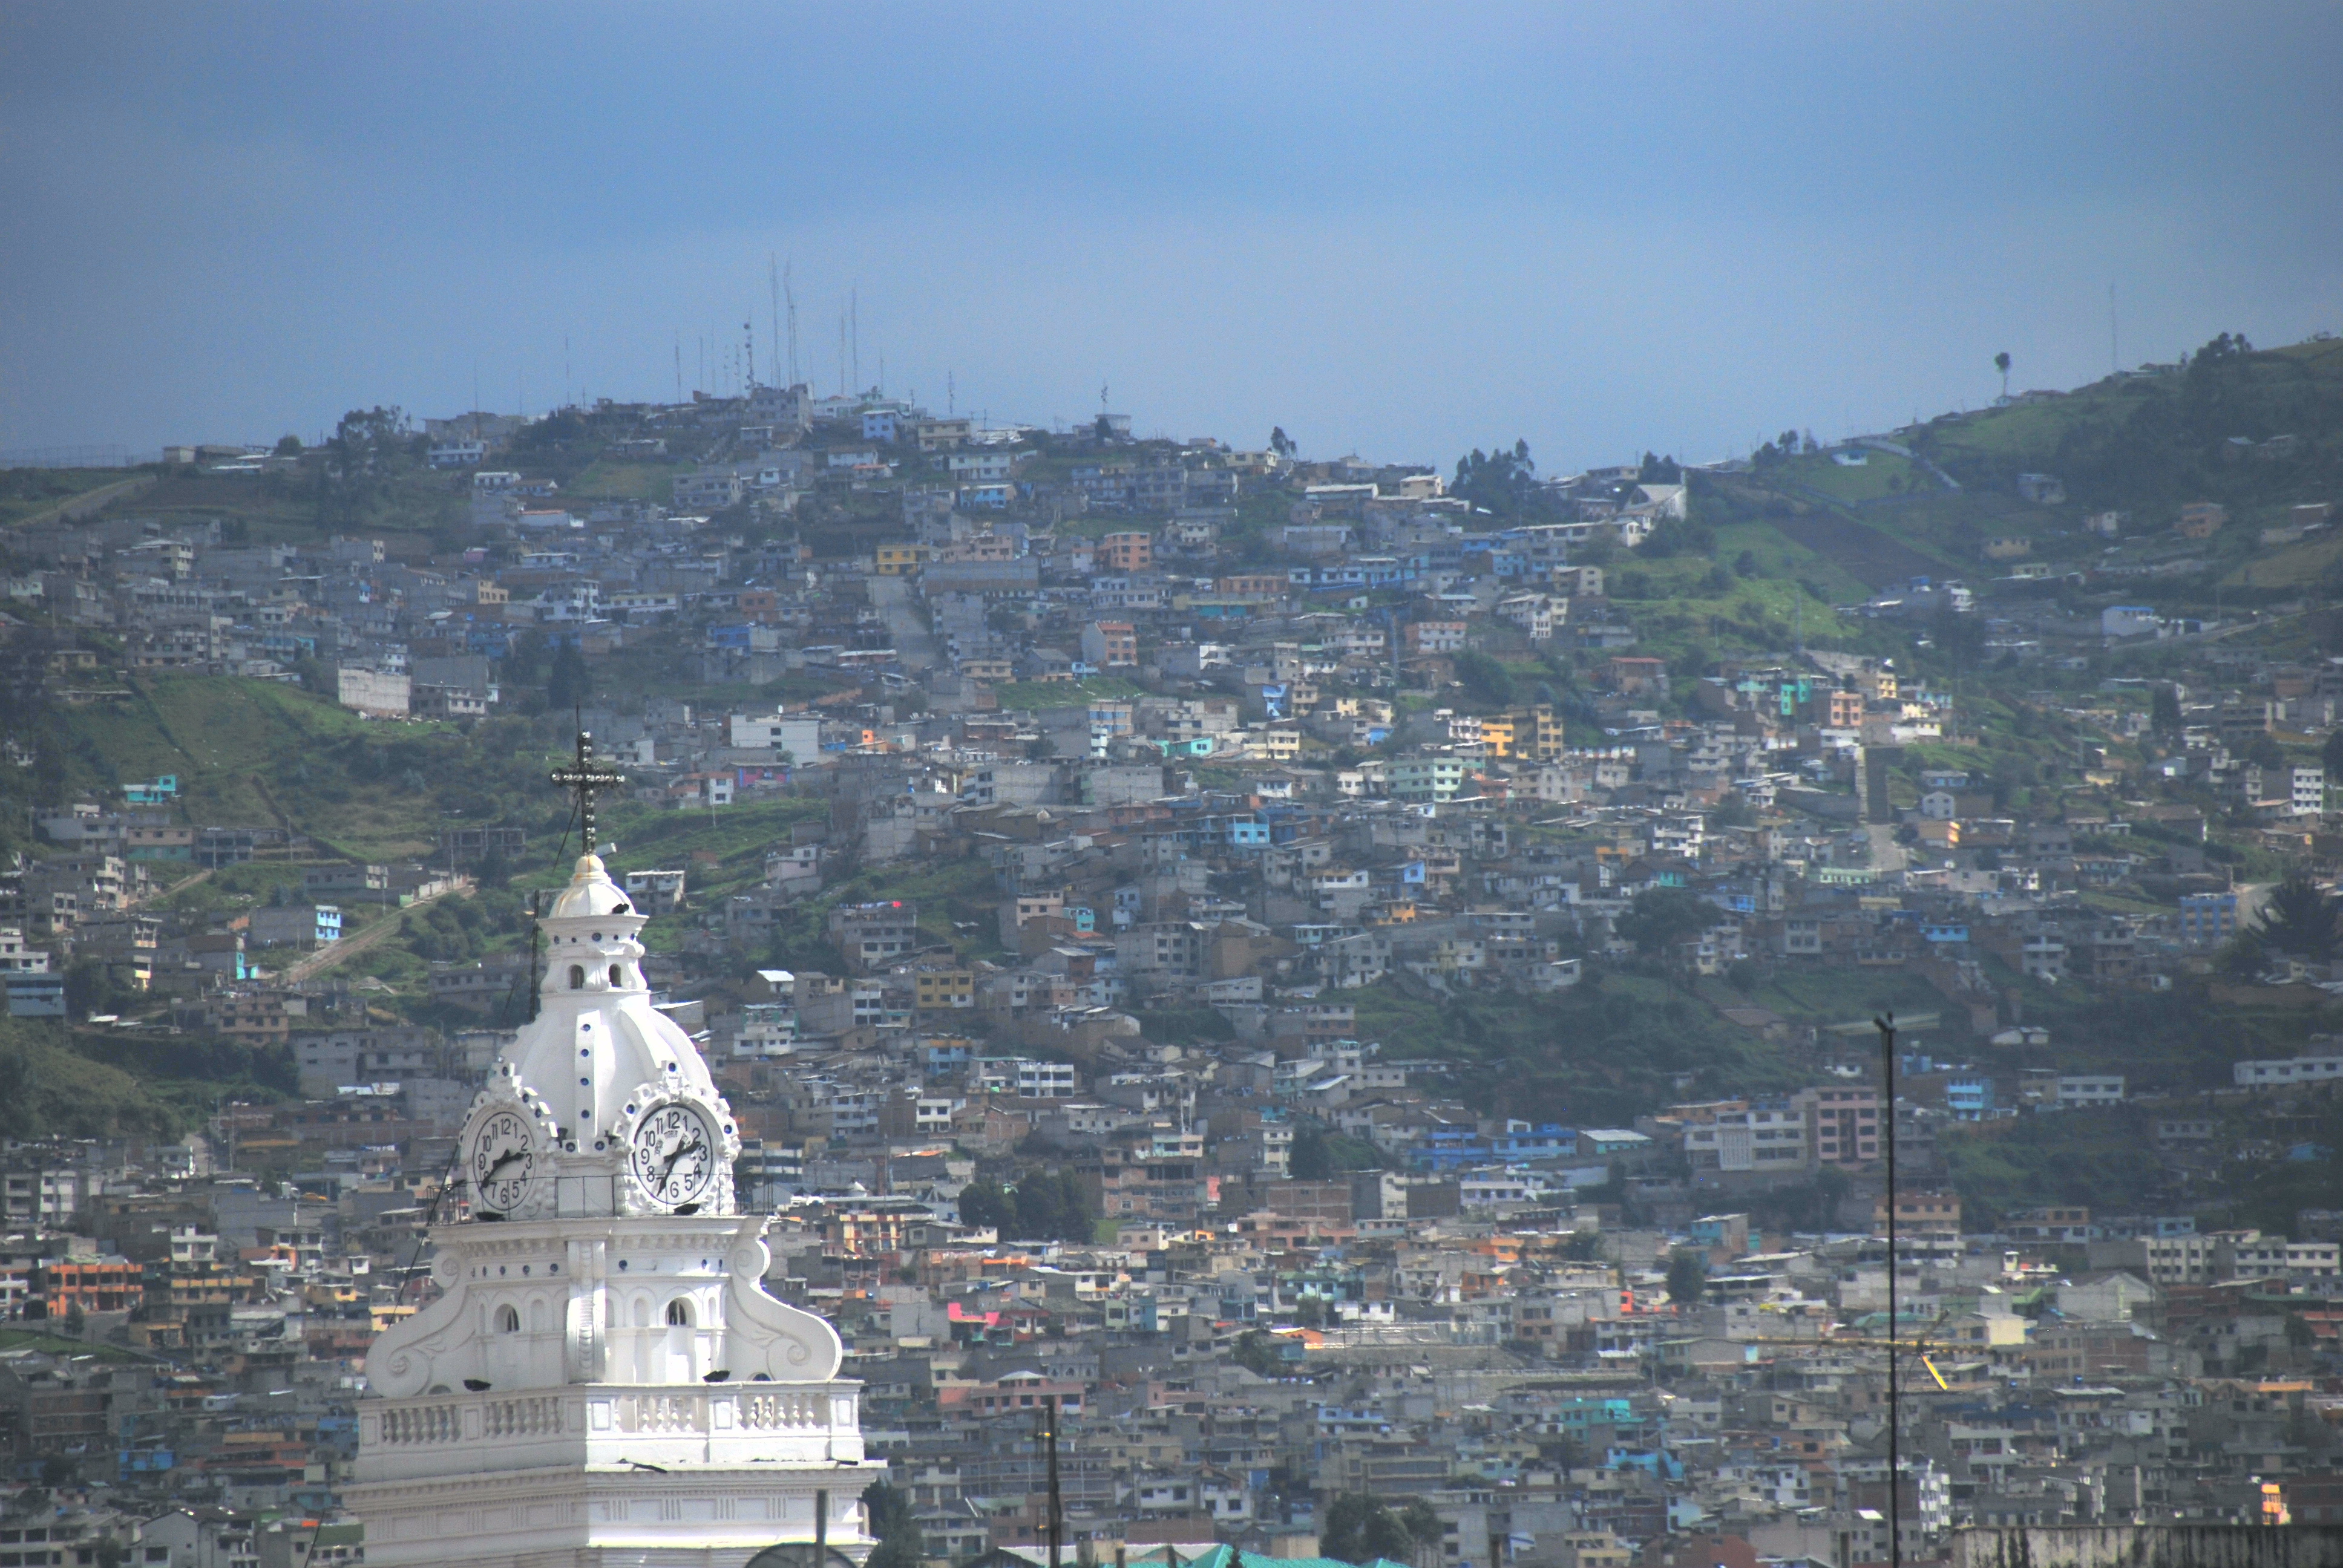 Click picture to see more of Quito's Old Town.